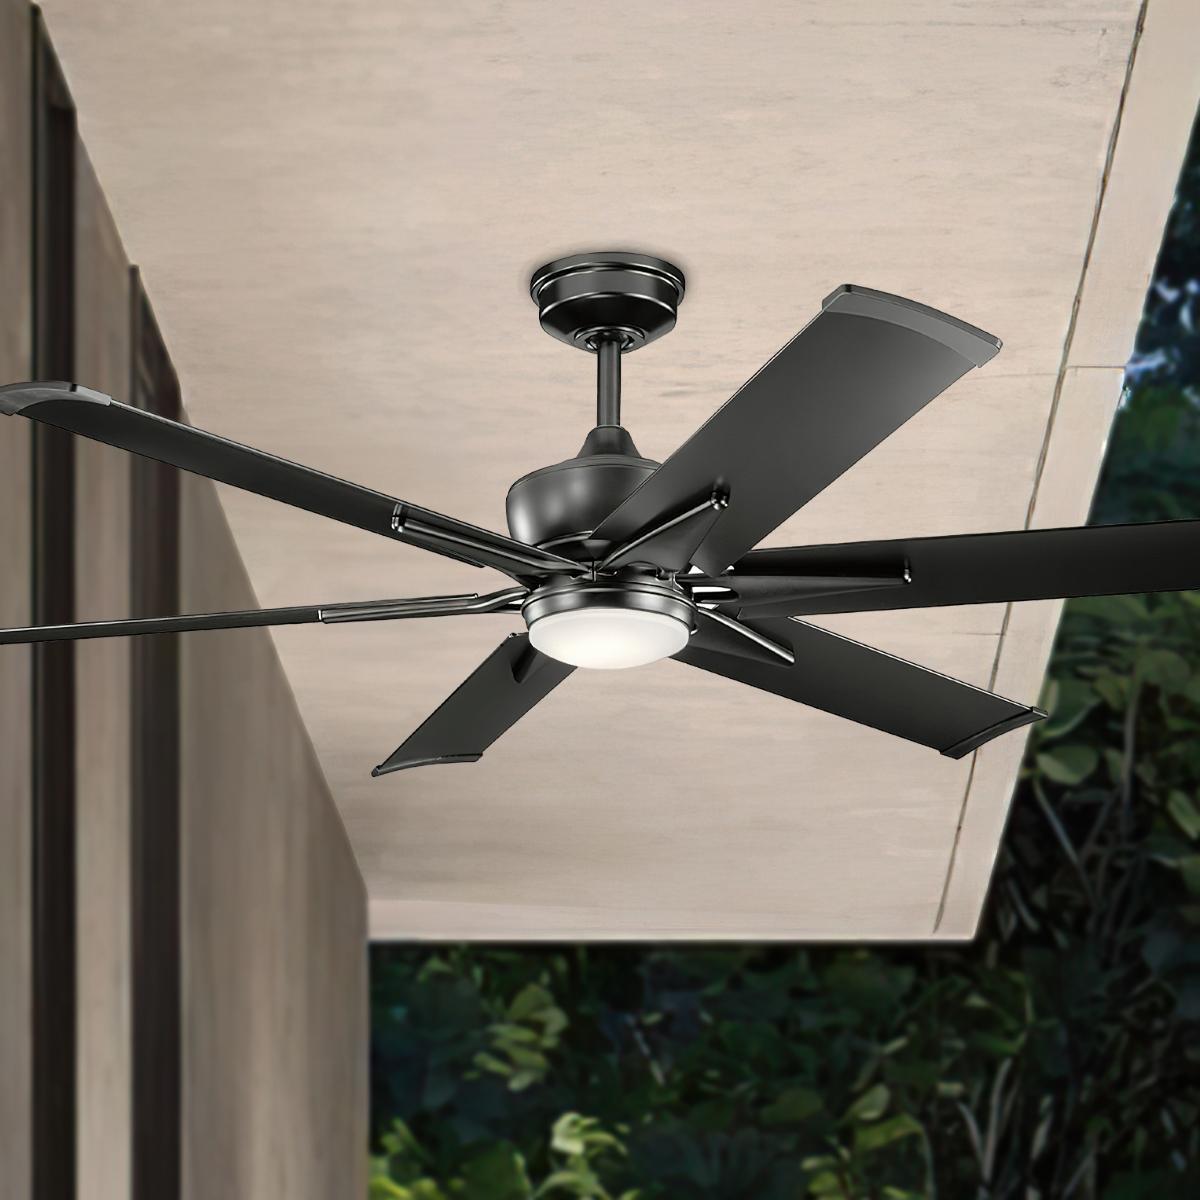 Szeplo Patio 60 Inch Windmill Outdoor Ceiling Fan With Light, Wall Control Included